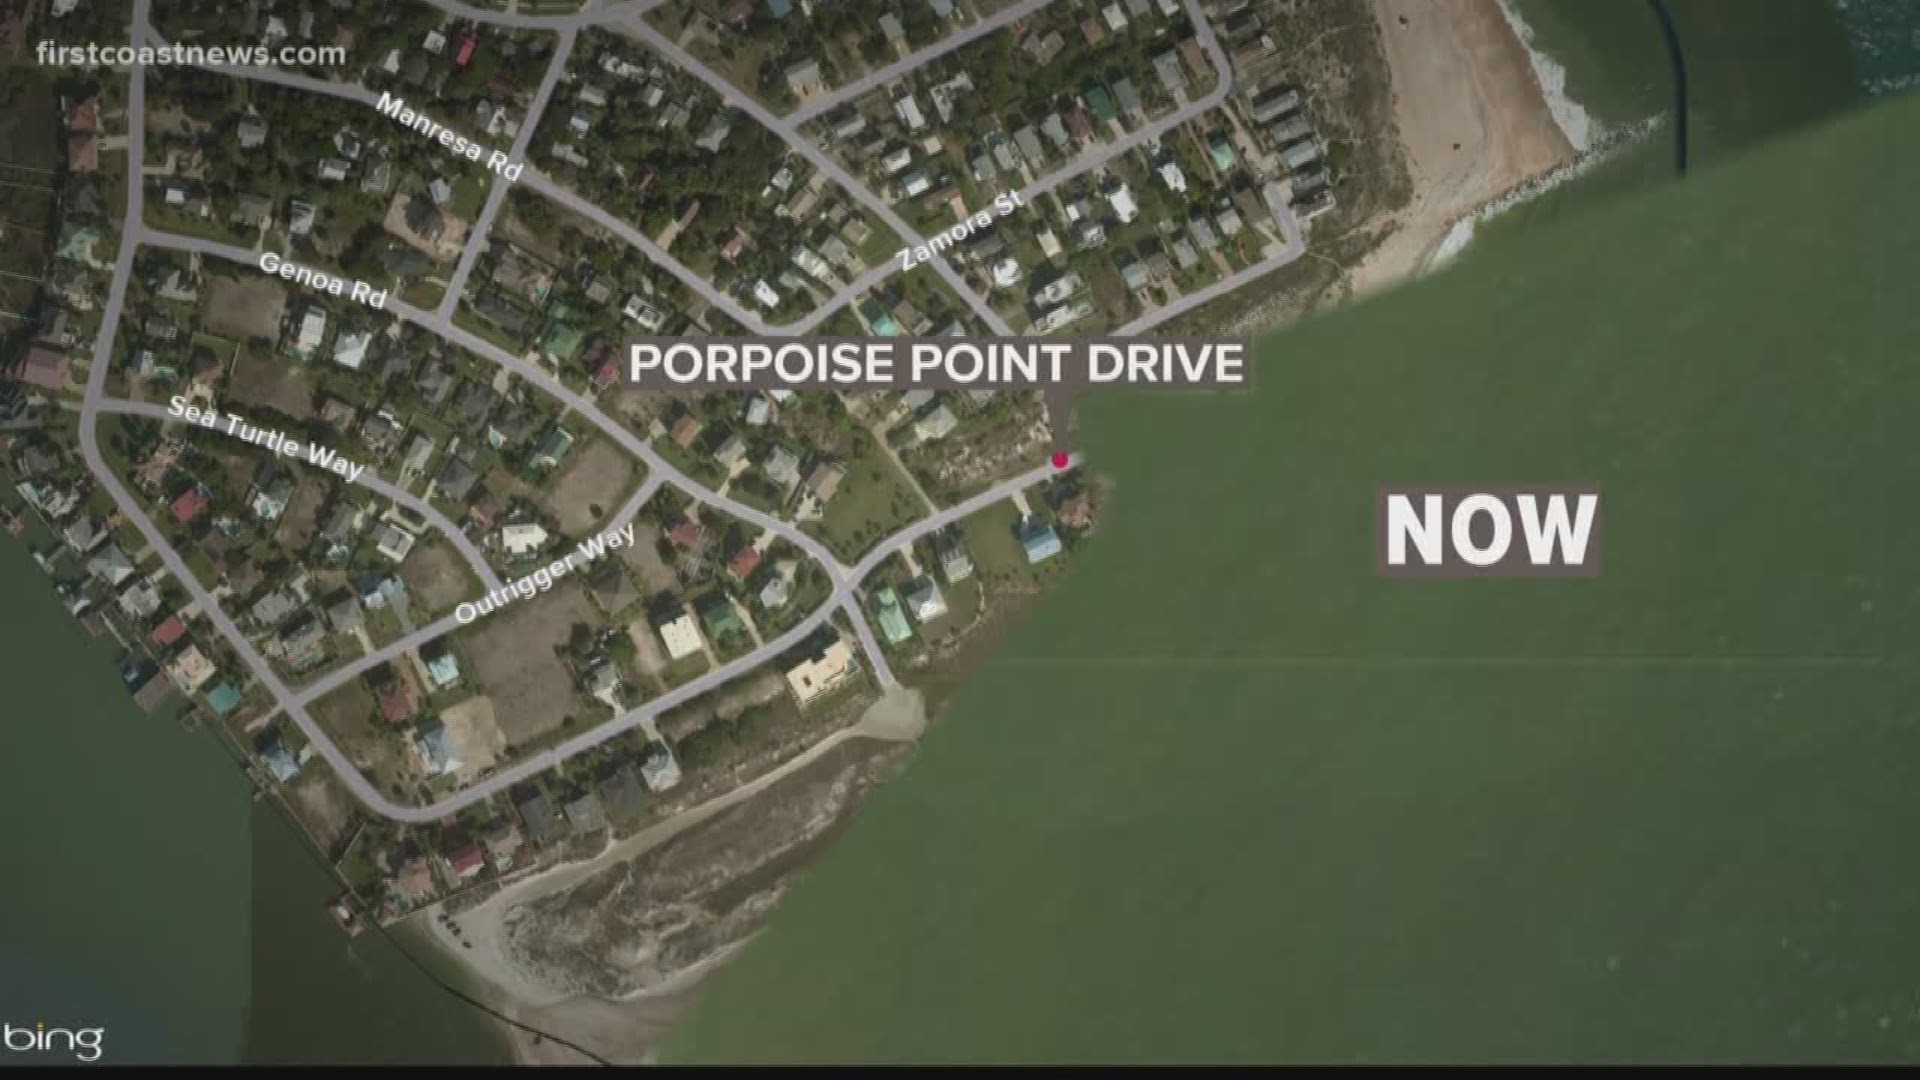 A local state of emergency has been declared for a neighborhood in St. Johns county. Waves from the Nor'easter and extra high tides from the full moon pushed ocean water into the Porpoise Point neighborhood.